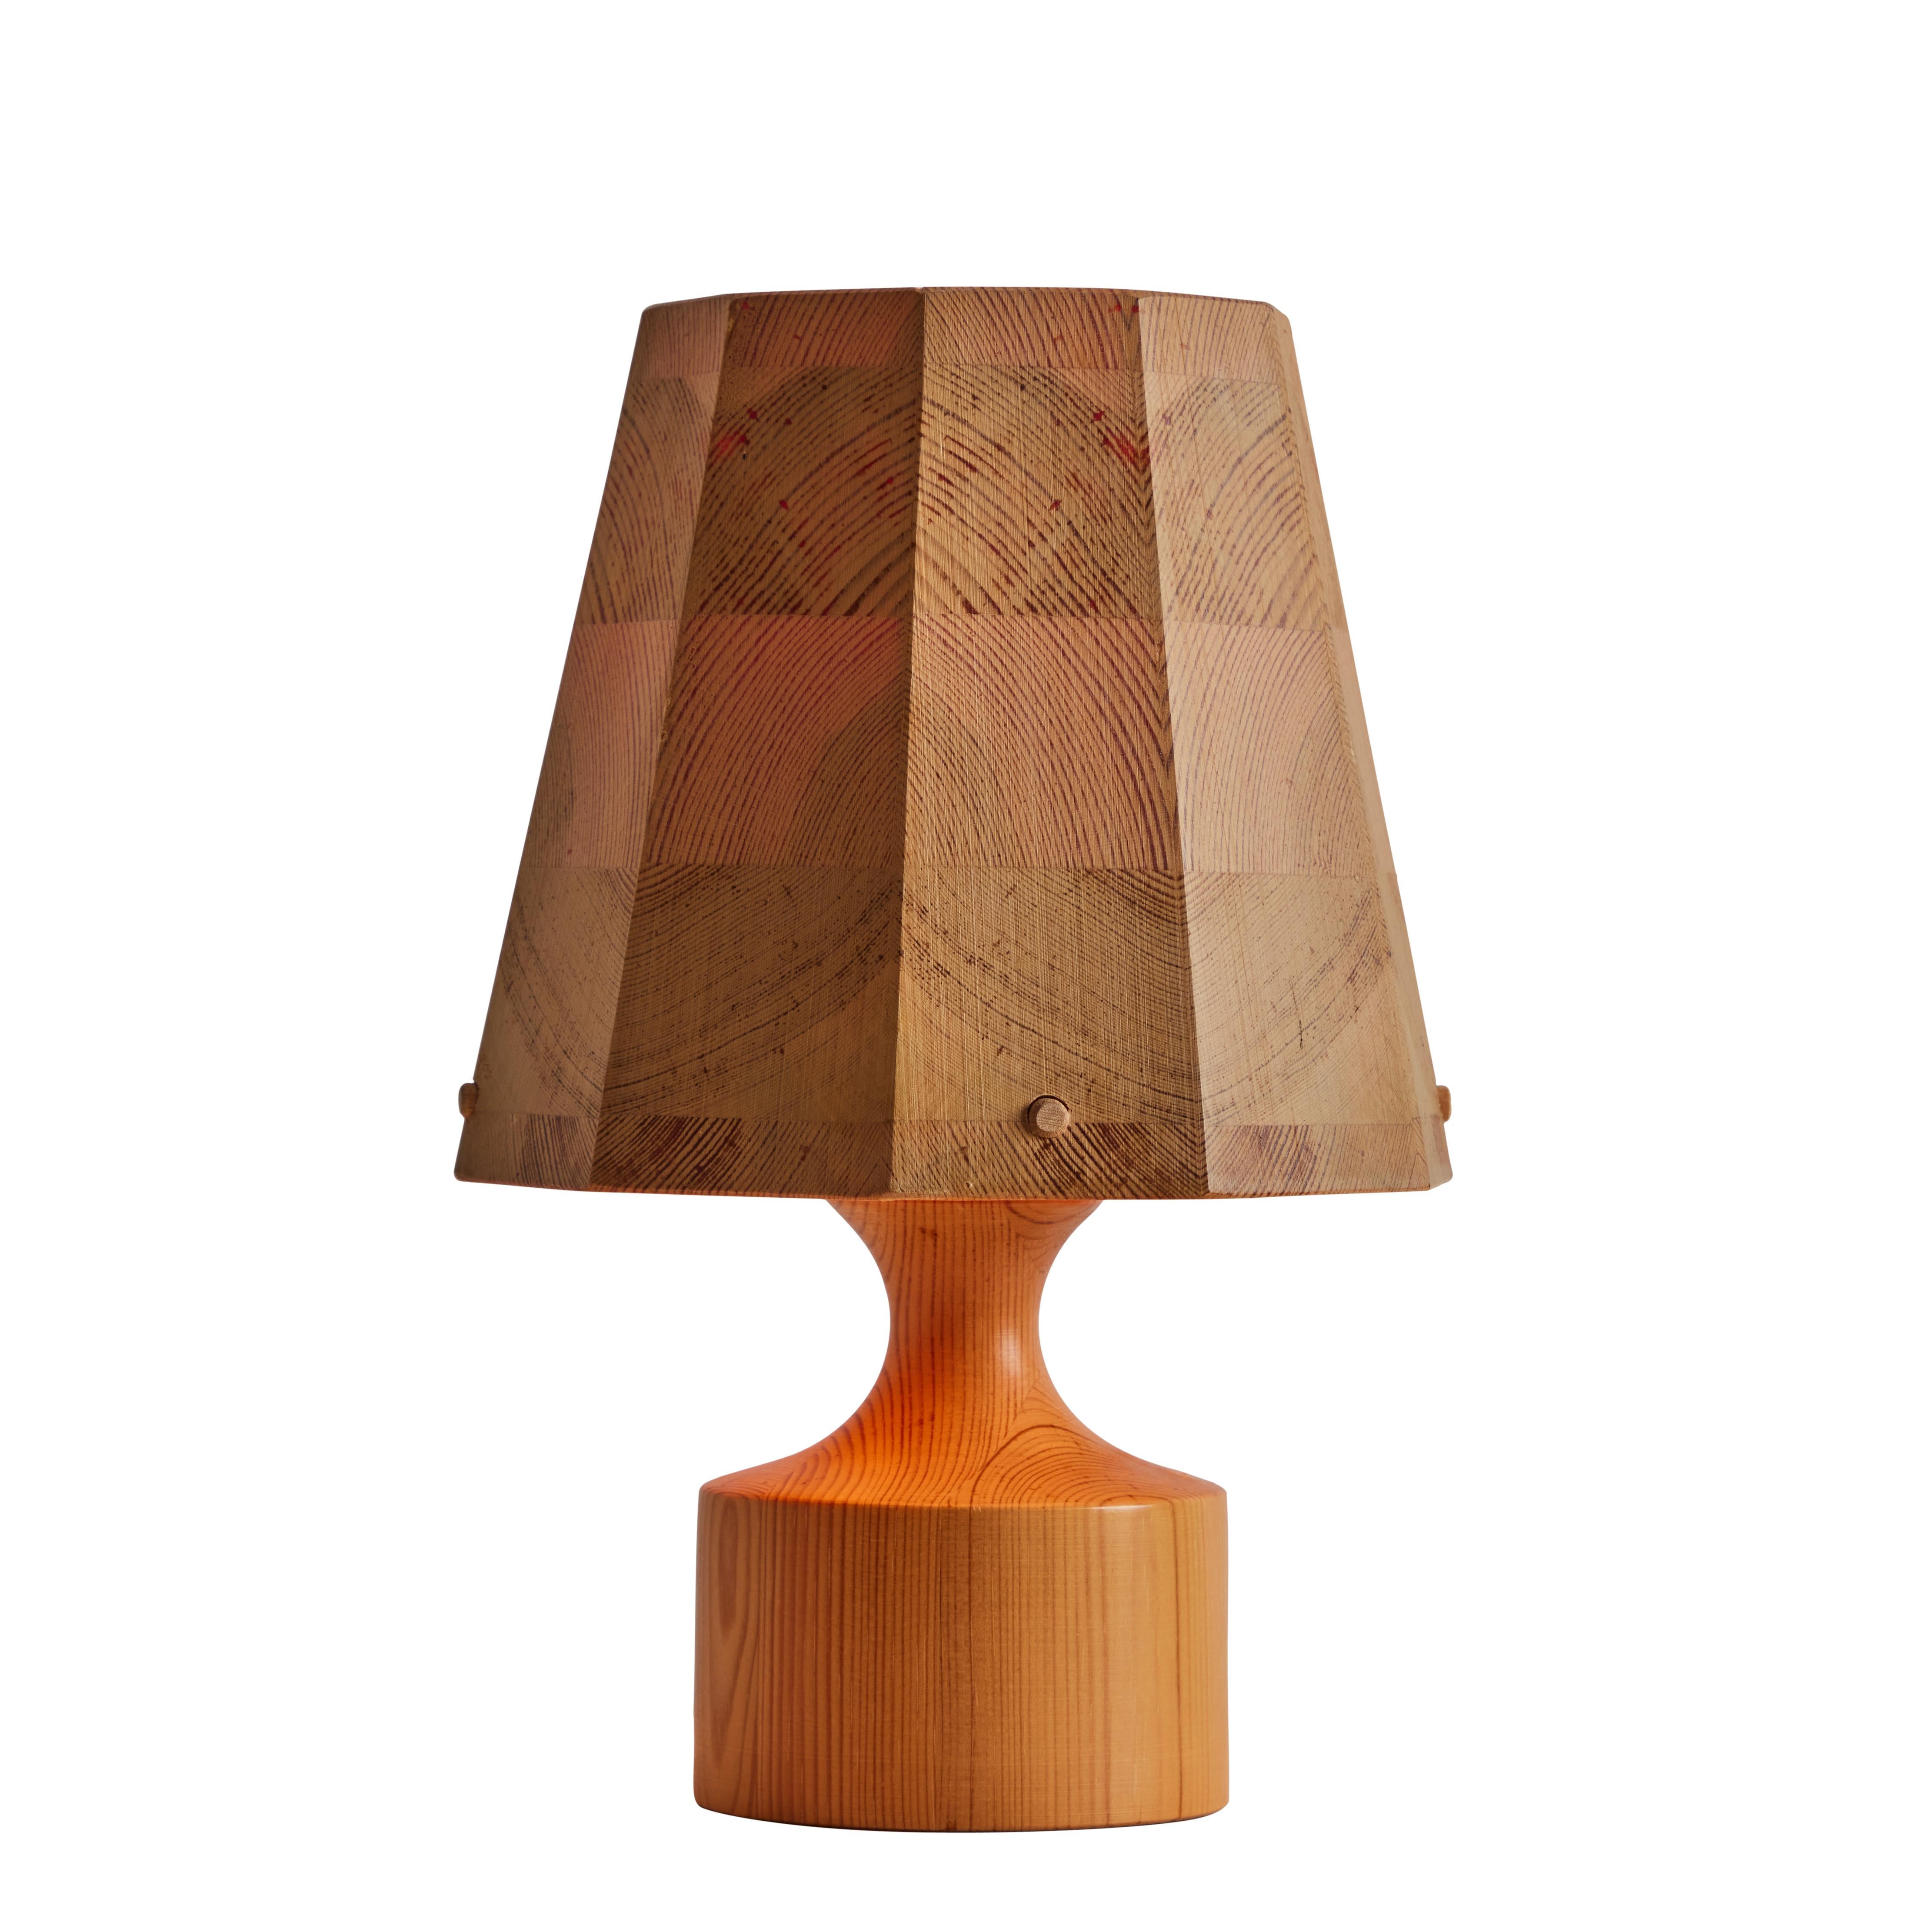 Pair of 1960s Wood Table Lamps Attributed to Hans-Agne Jakobsson for AB Ellysett For Sale 14